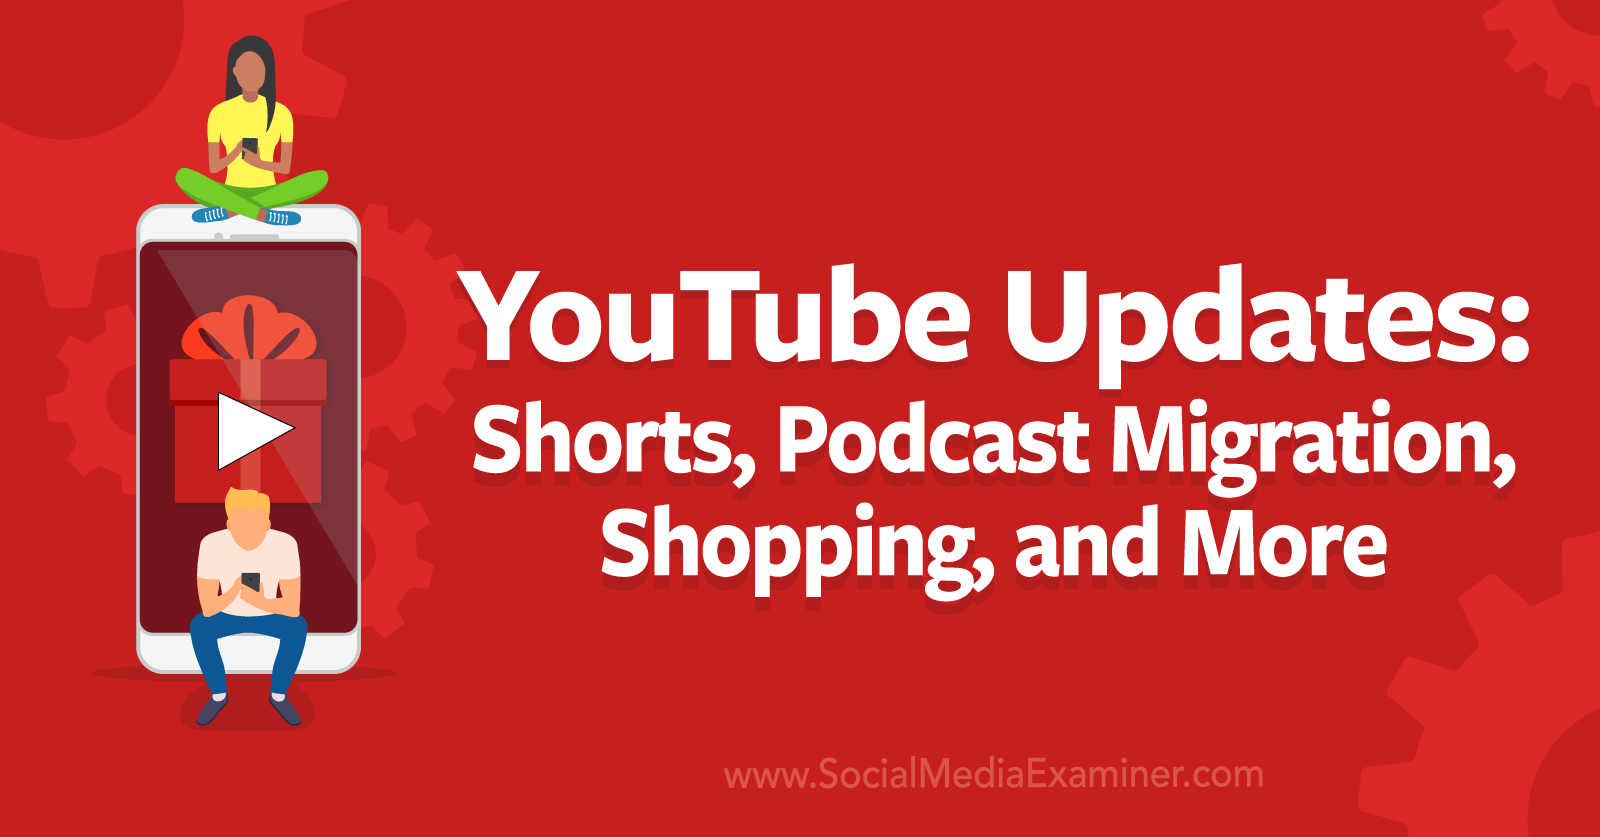 YouTube Updates: Shorts, Podcast Migration, Shopping and More by Social Media Examiner